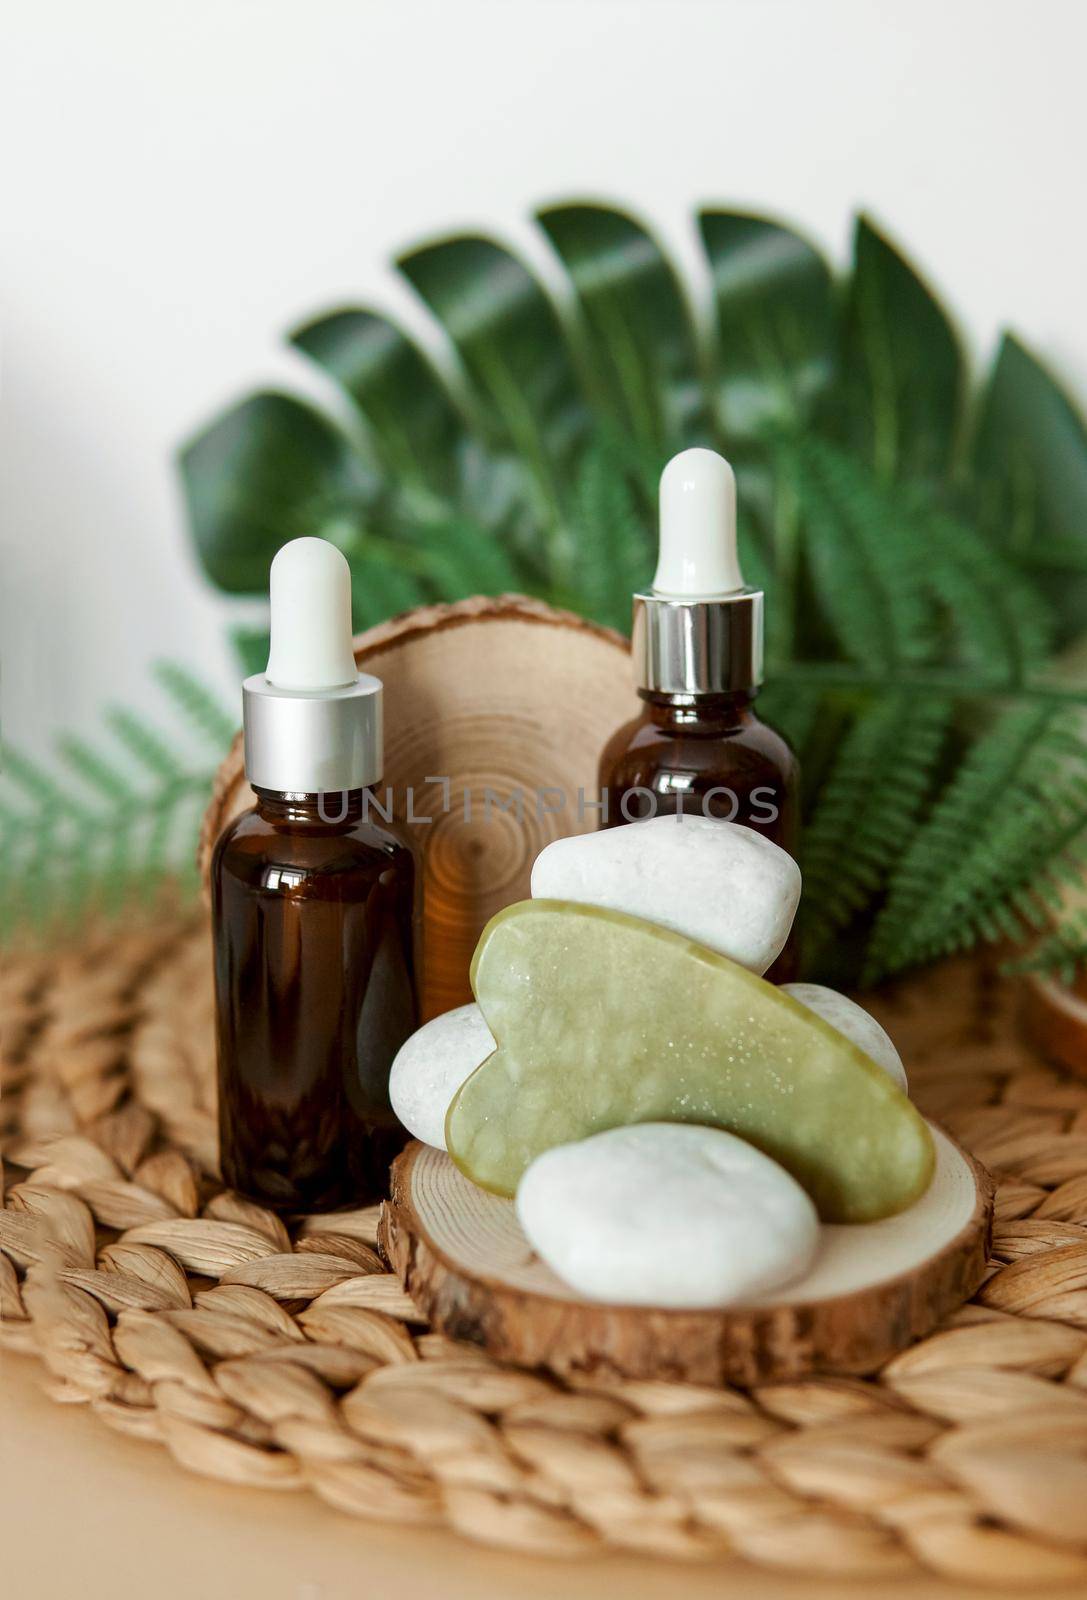 Jade Gua sha scraper and bottles of cosmetic serum for the face on wooden stands. Concept zero waste.